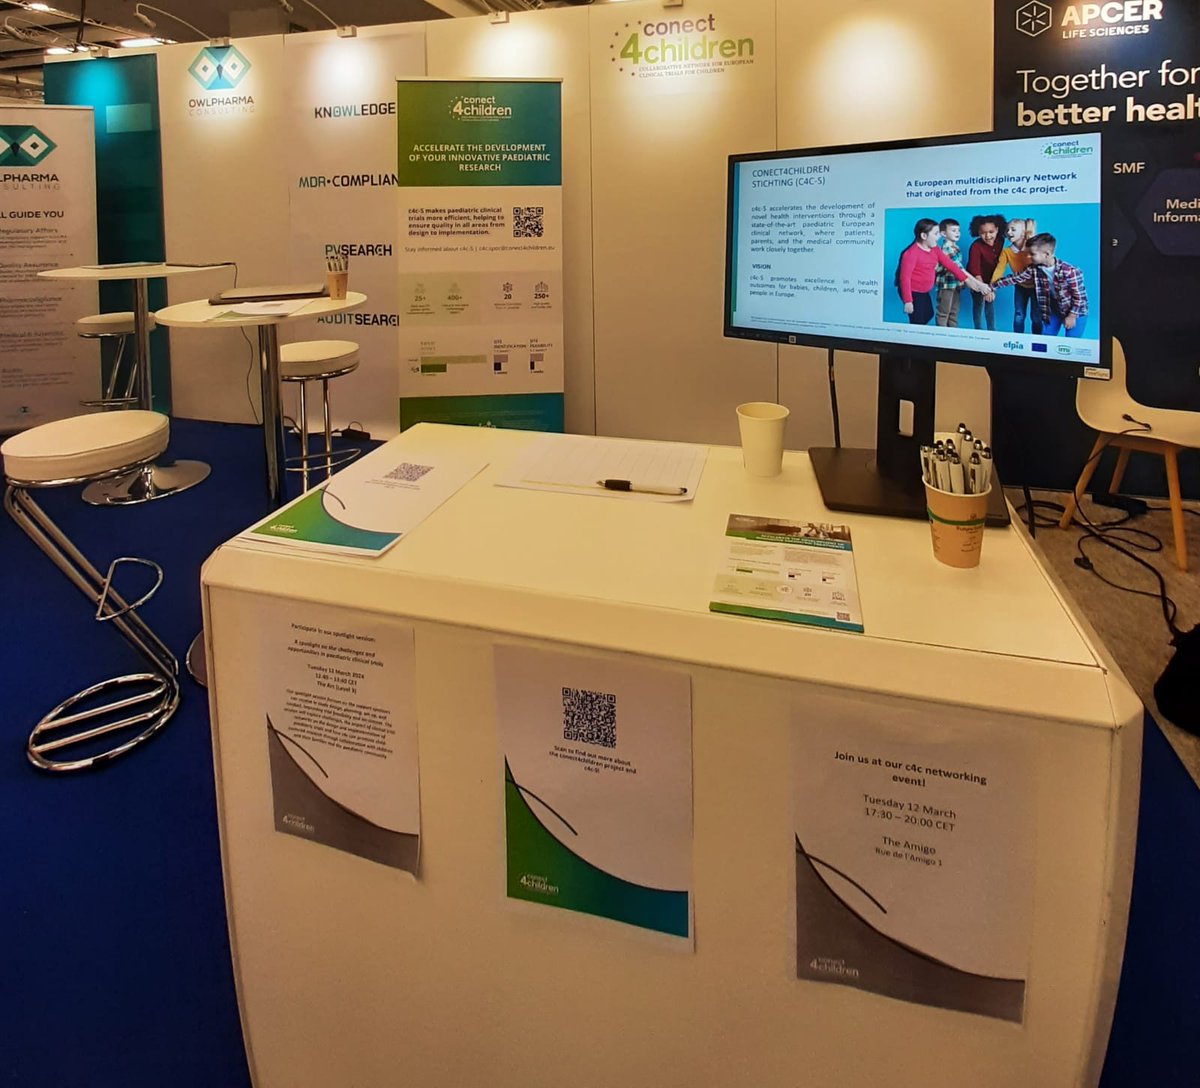 The c4c team is at the #DIAEurope2024! Come to 📌stand H7 and join us to discuss the future of paediatric clinical trials 👶 #paediatricclinicaltrials #c4c #conect4children #conference #healthcare #lifesciences @DIA